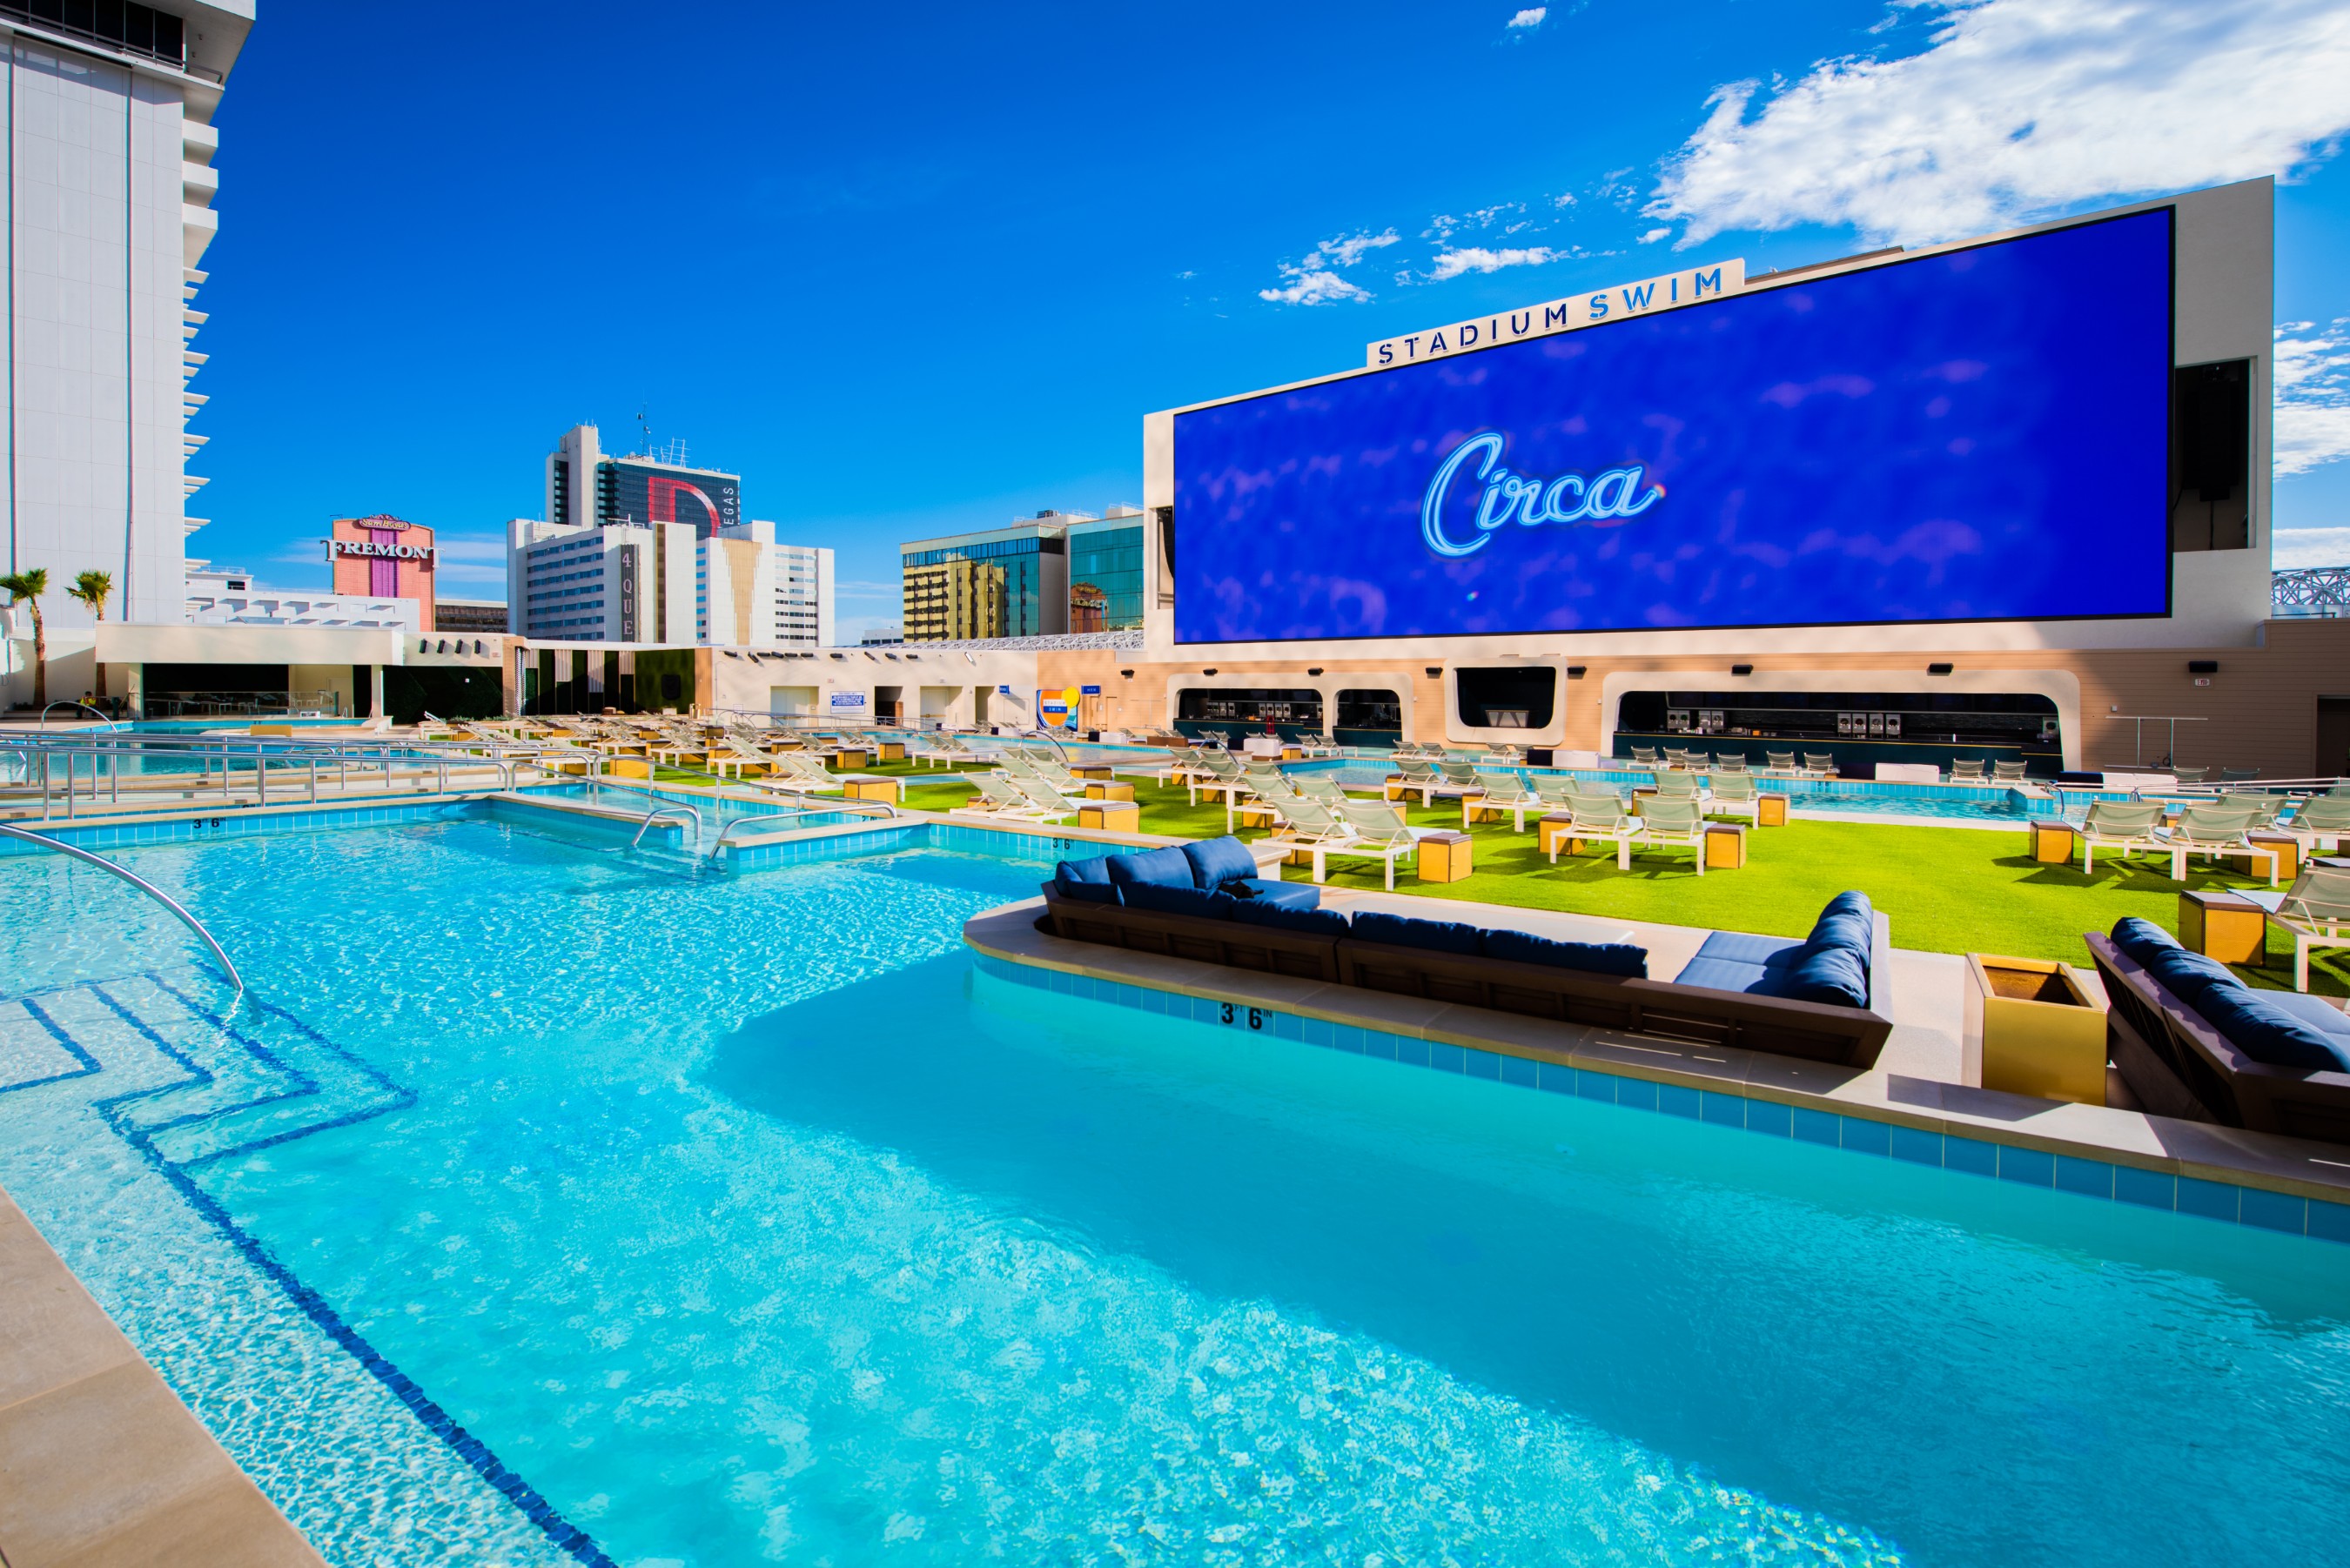 New Circa Resort & Casino Launches In Downtown W/Visionary Las Vegas